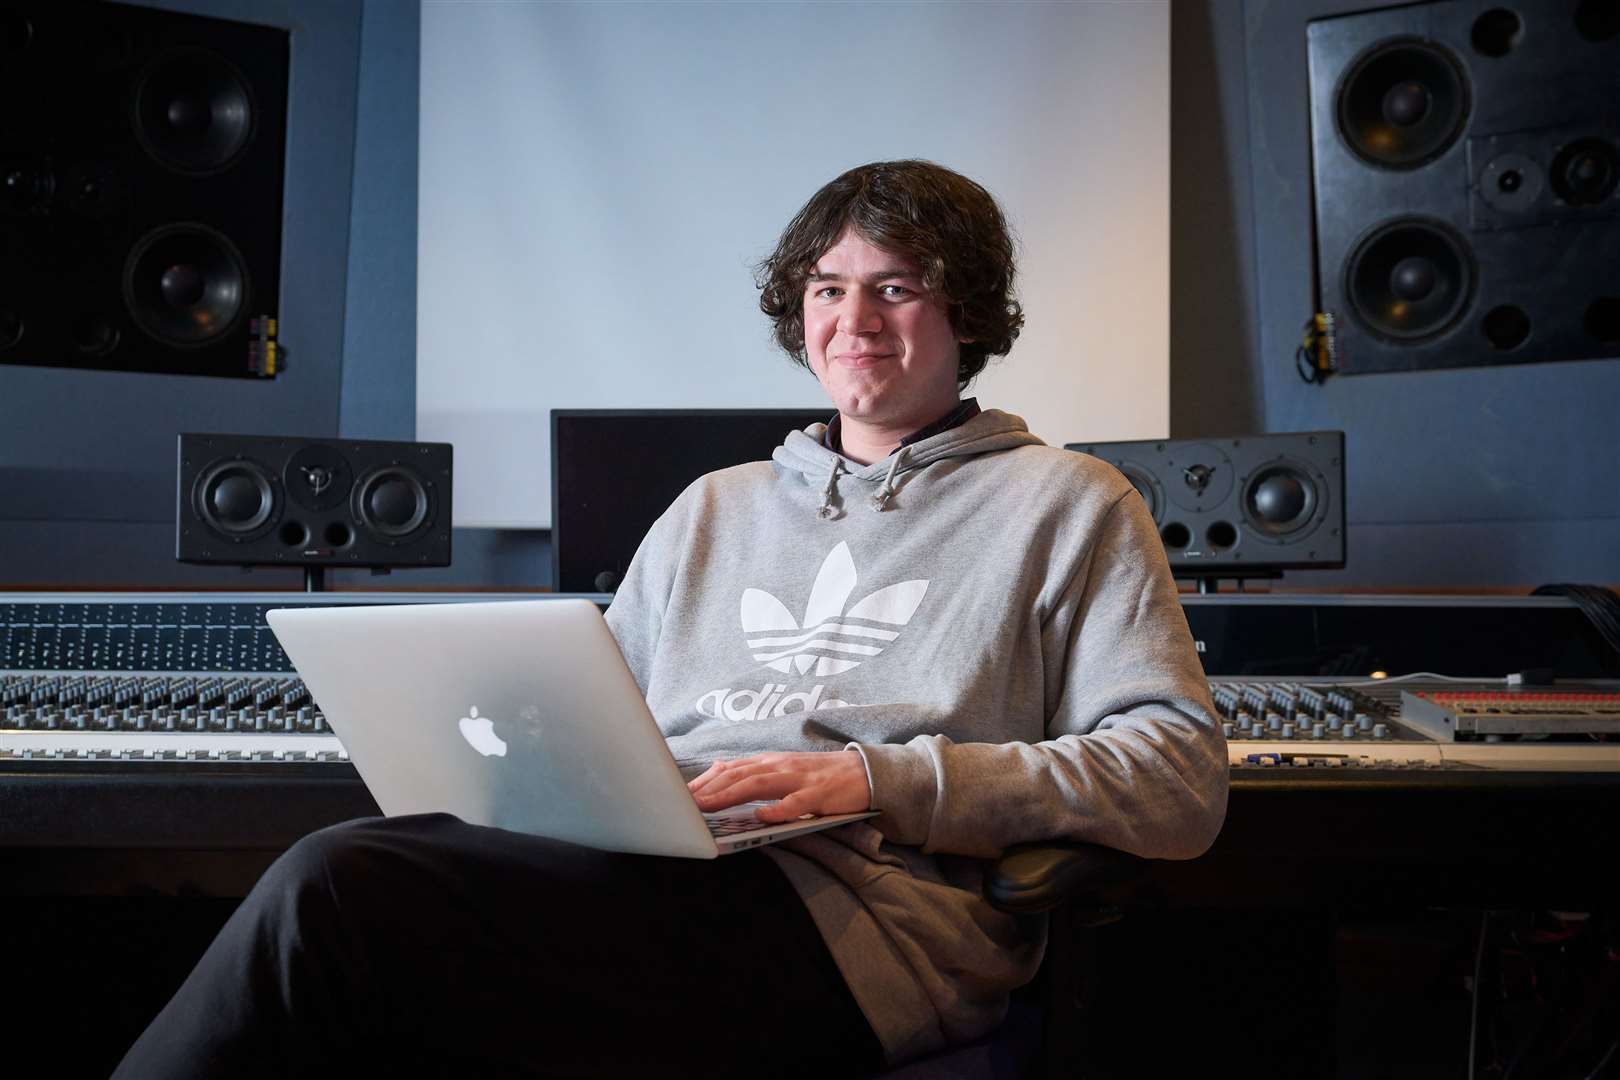 Scott Rough, BA (Hons) Music Business student and 2021 winner of The John Preston International Music Award, photographed at Perth College UHI in December 2021 where Scott is based for his studies.